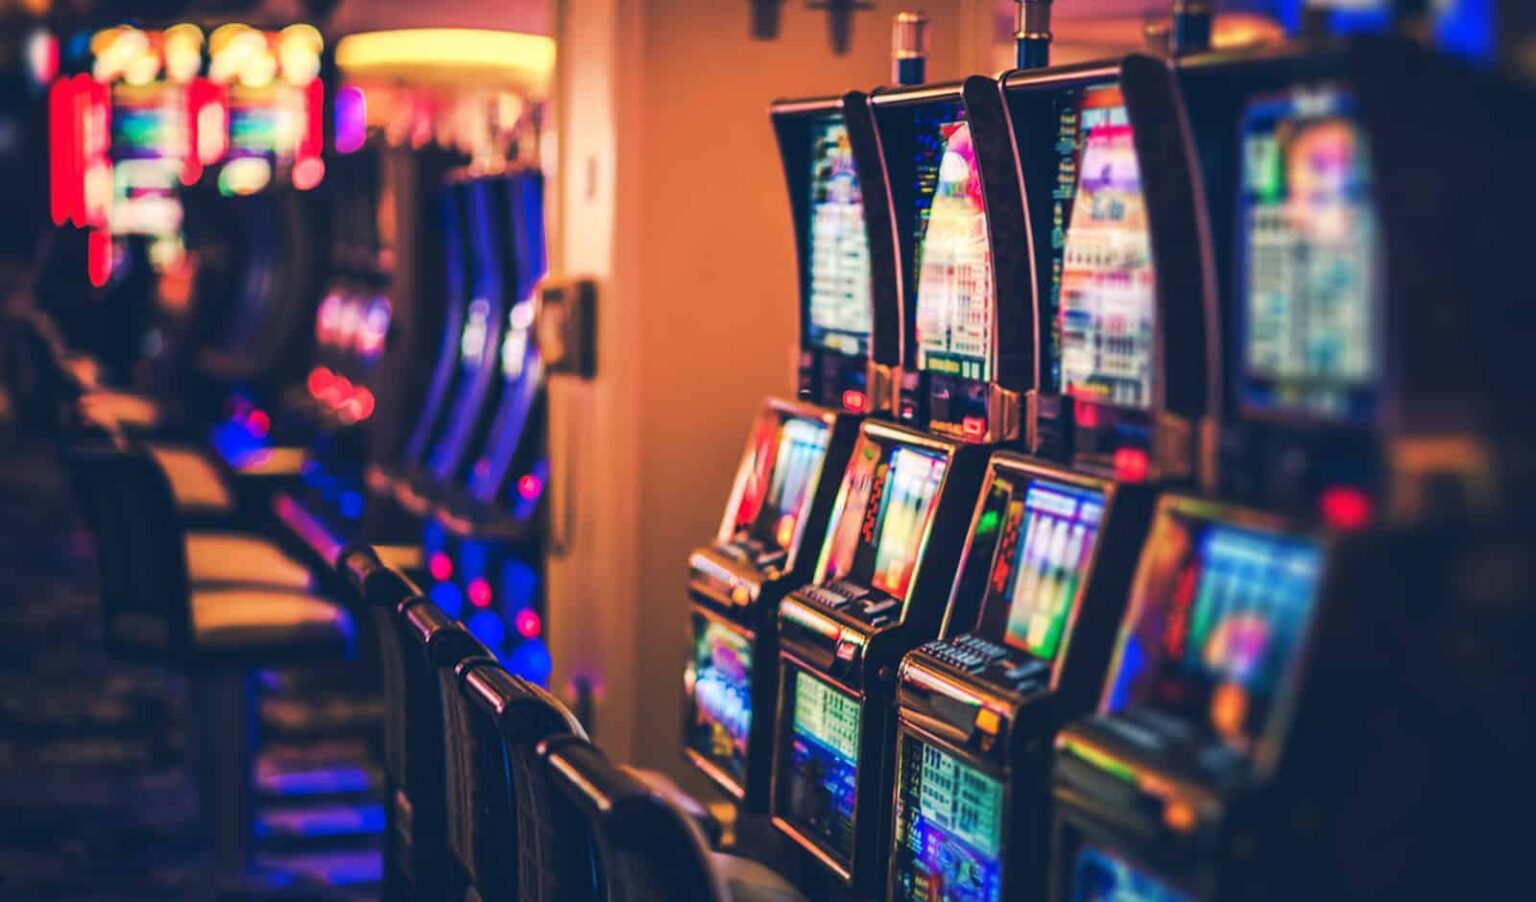 As time passes by, online games are getting more and more popular. Here are the best tips for playing slot games online.